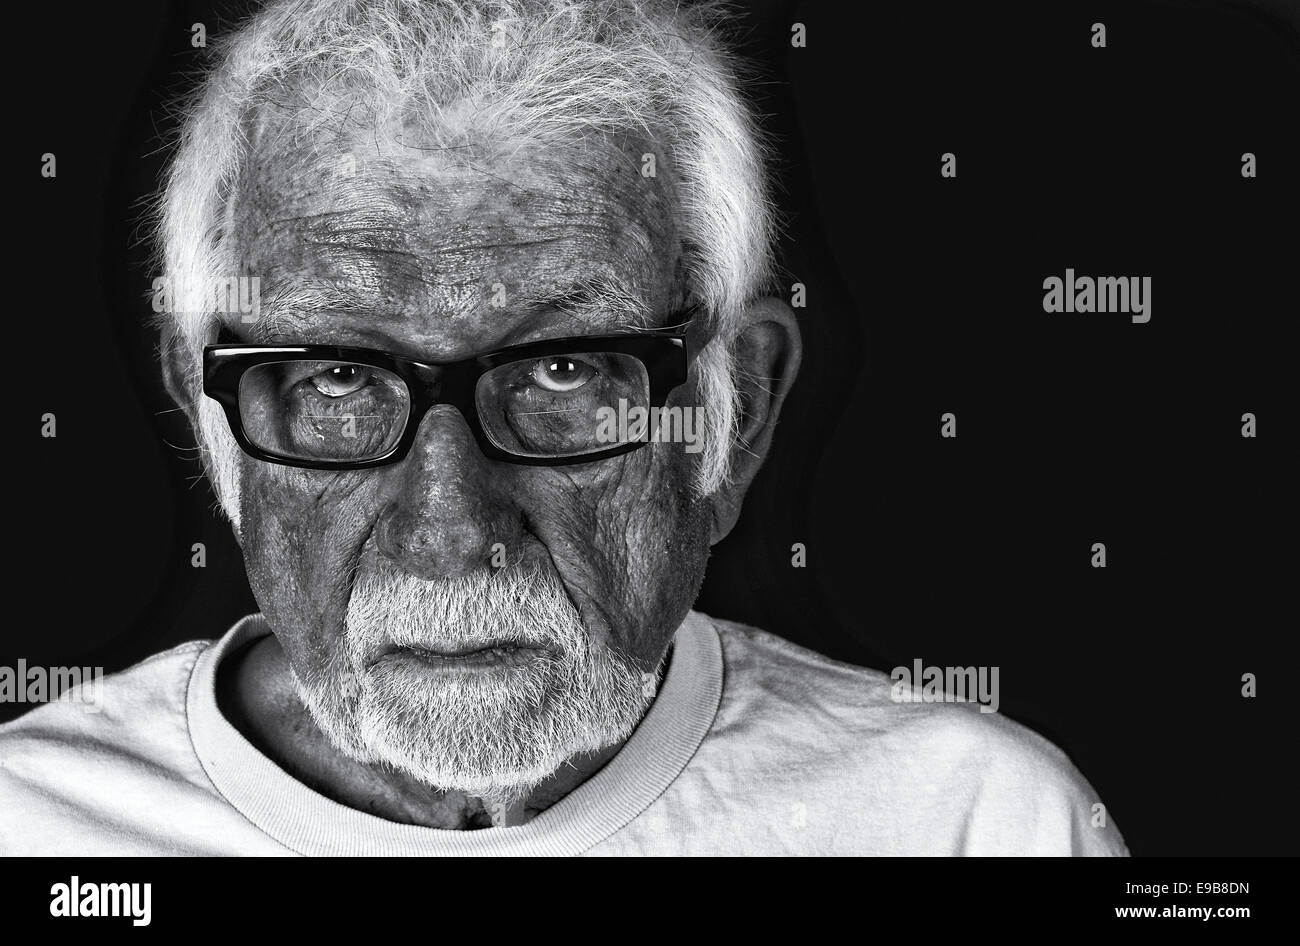 Black and white portrait of an elderly sad man with a tear rolling down his cheek Stock Photo